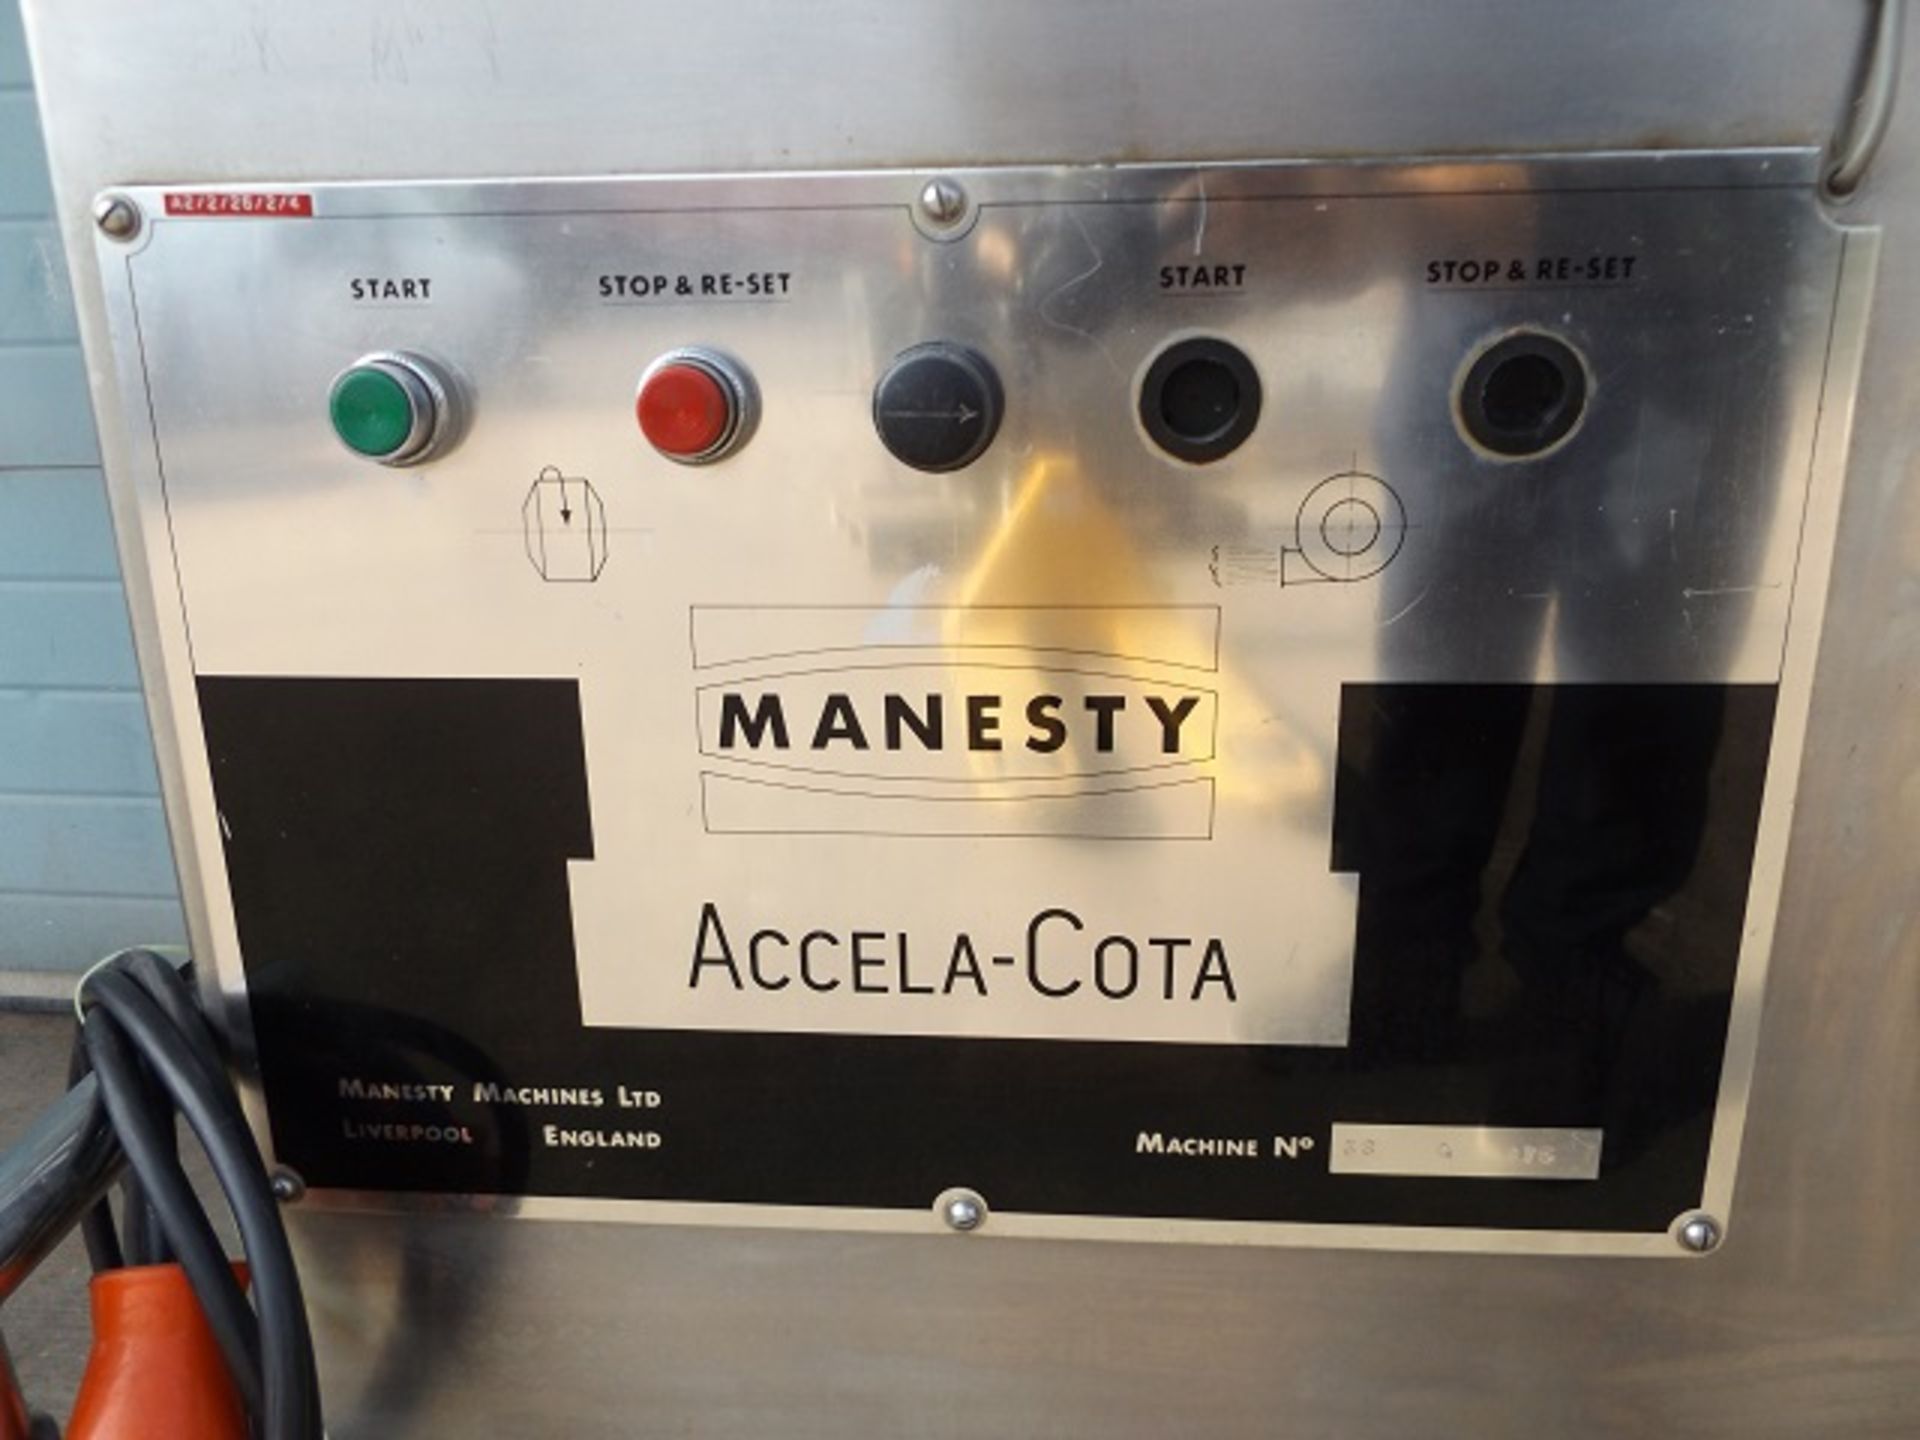 Manesty model Accelacota 10 small batch size tablet coating unit with air handling system. - Image 6 of 15